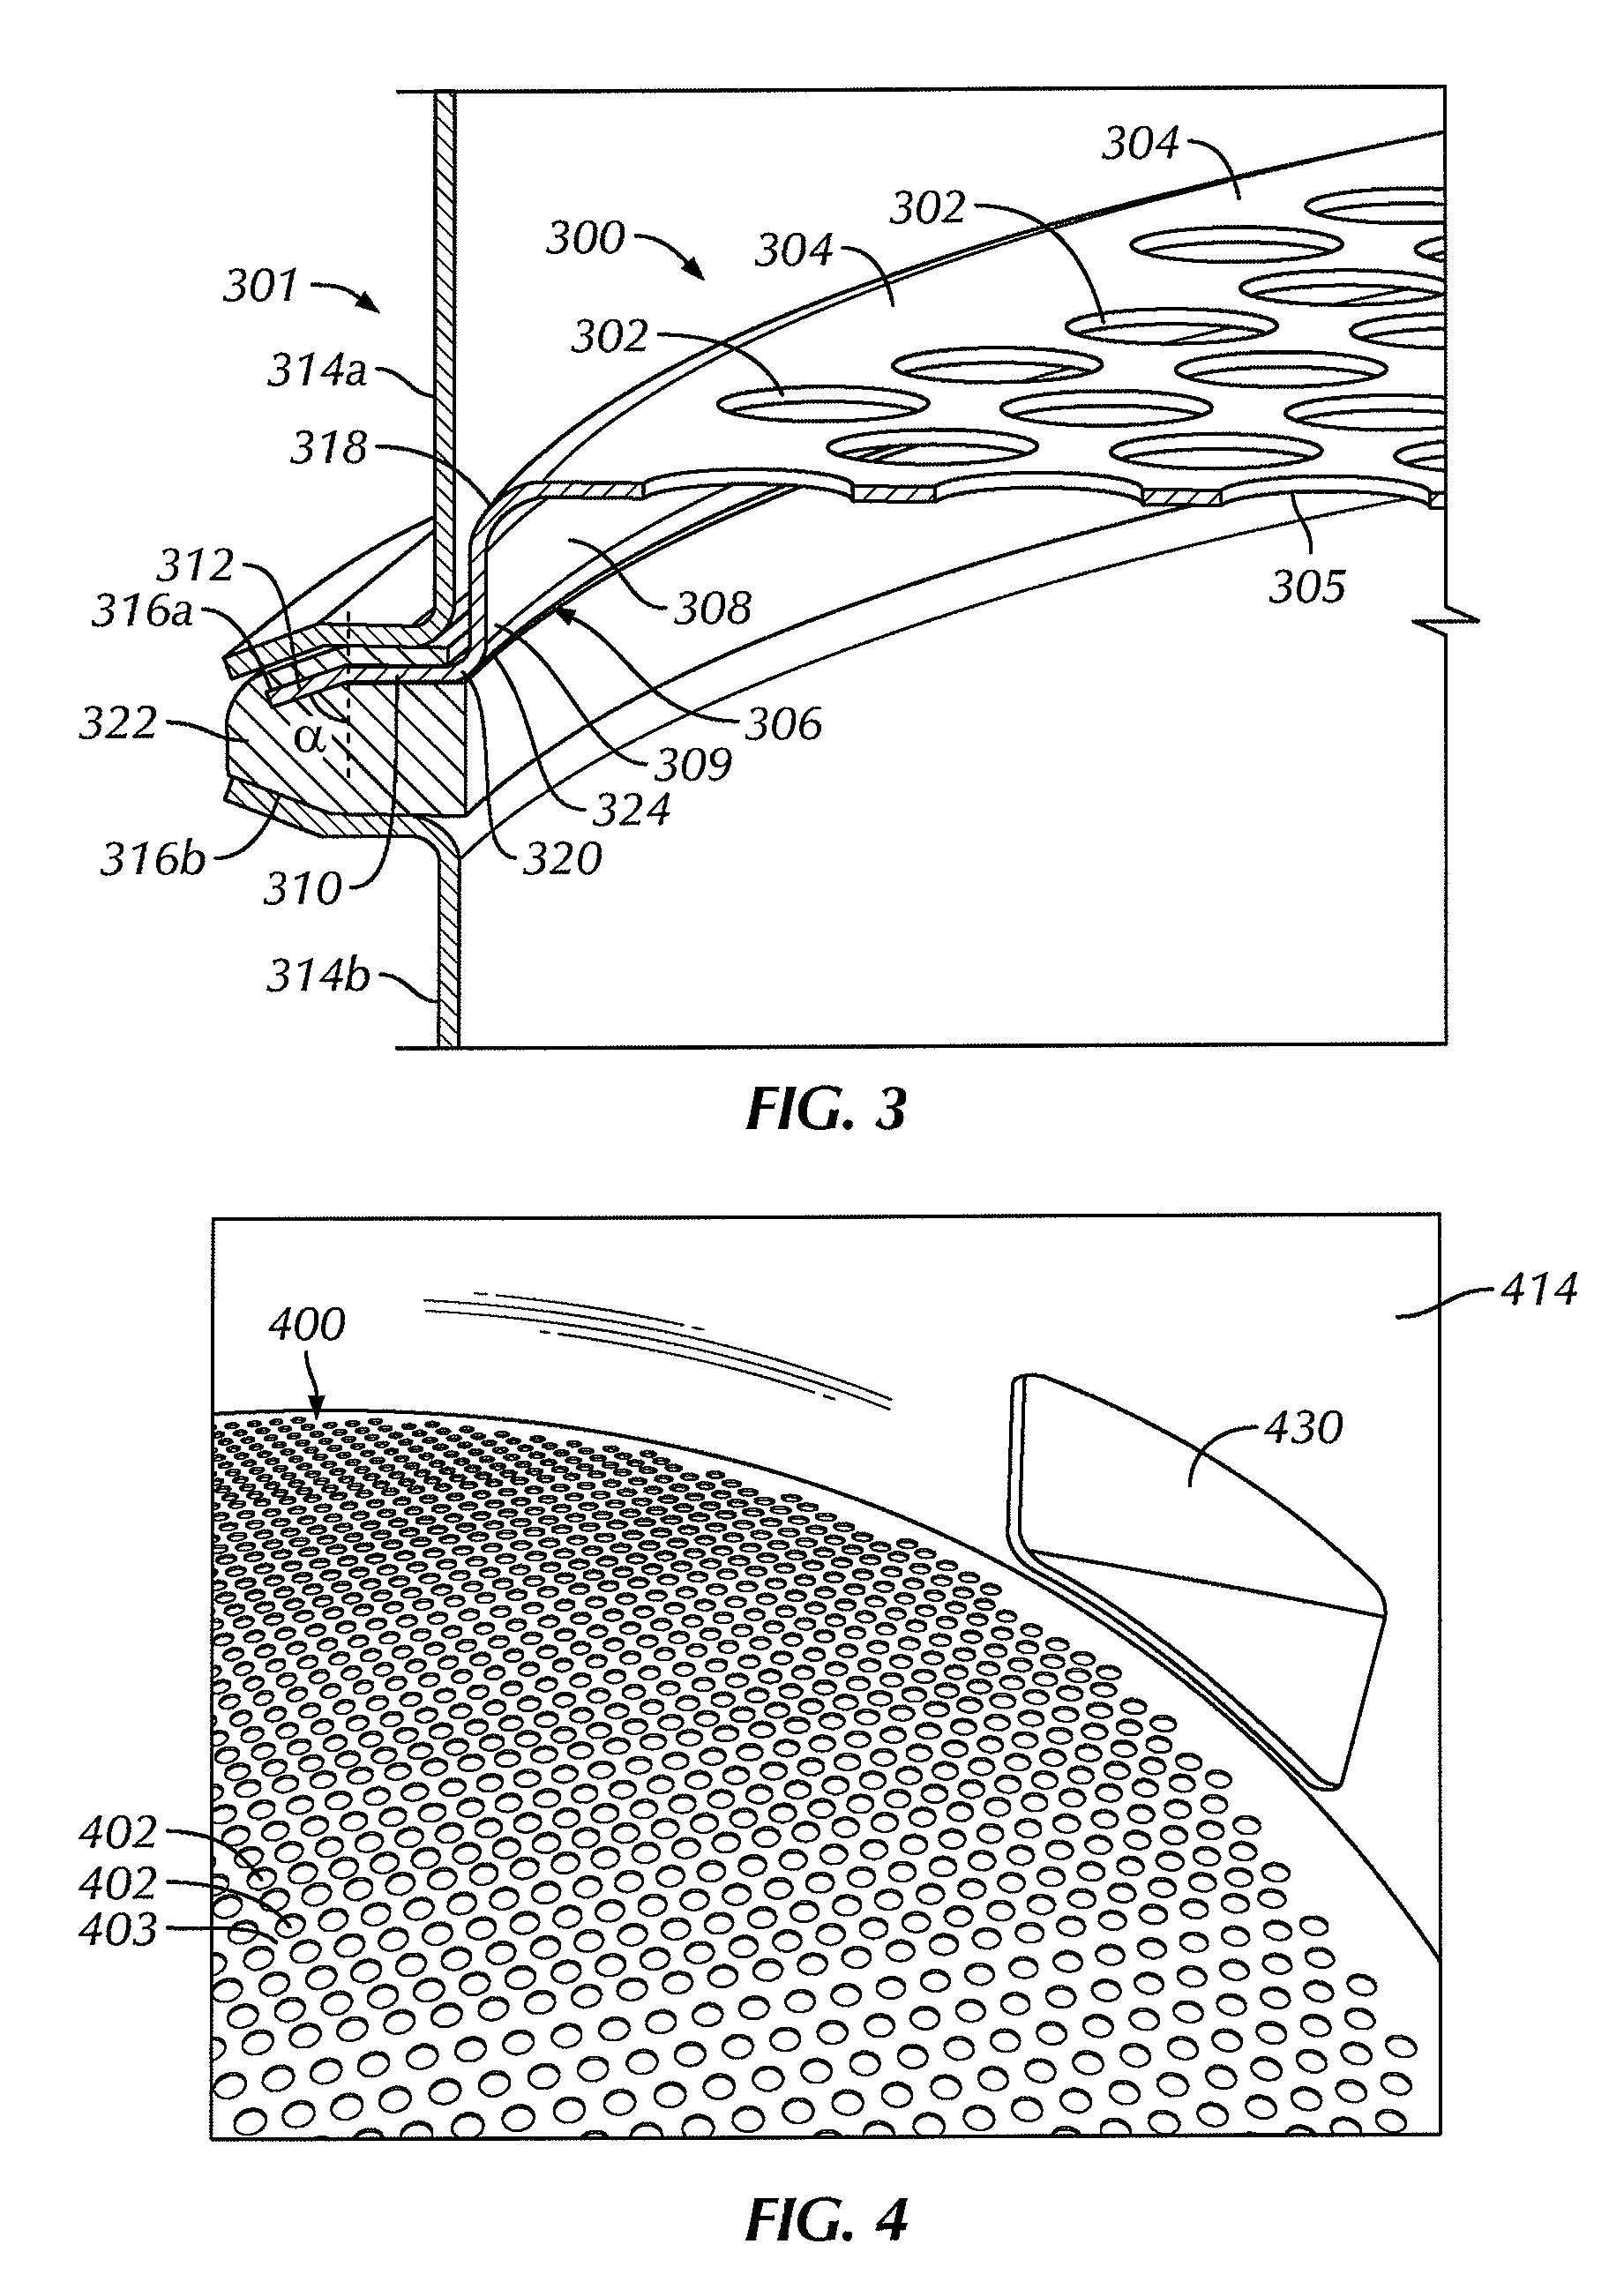 Flanged perforated metal plate for separation of pellets and particles